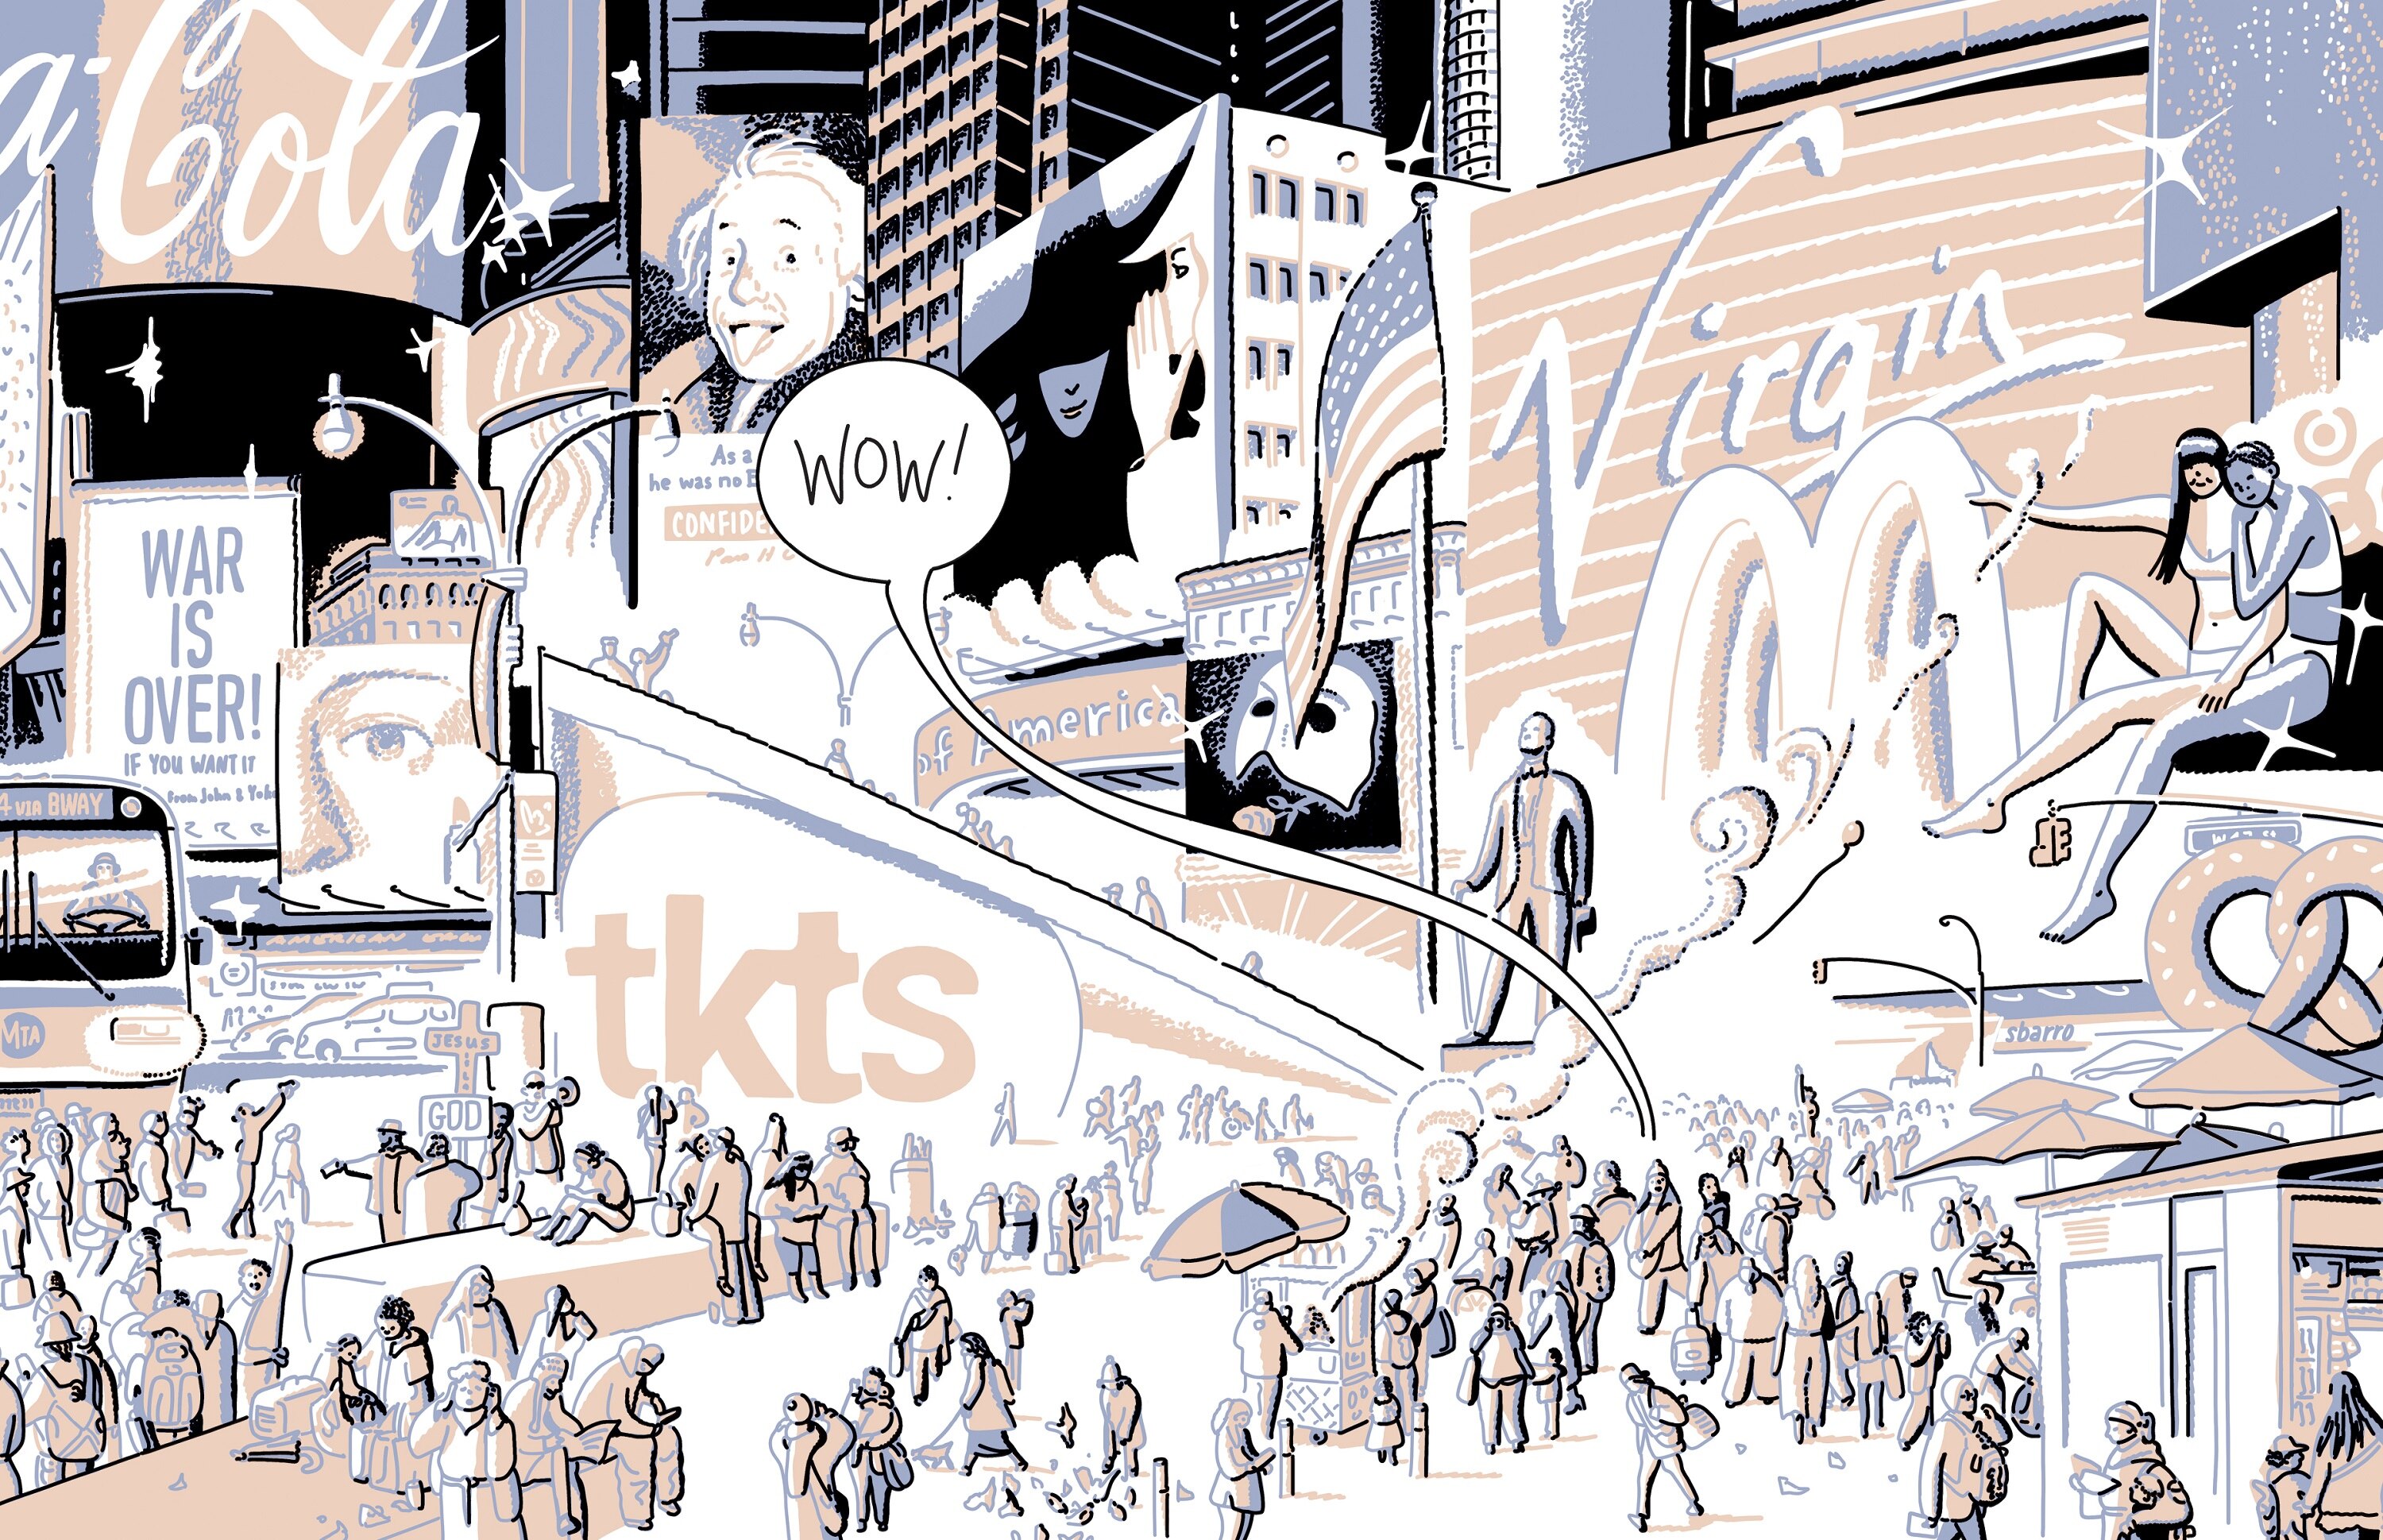 A page from a graphic novel depicting a street scene of New York with crowds of people and billboards in peach and blue